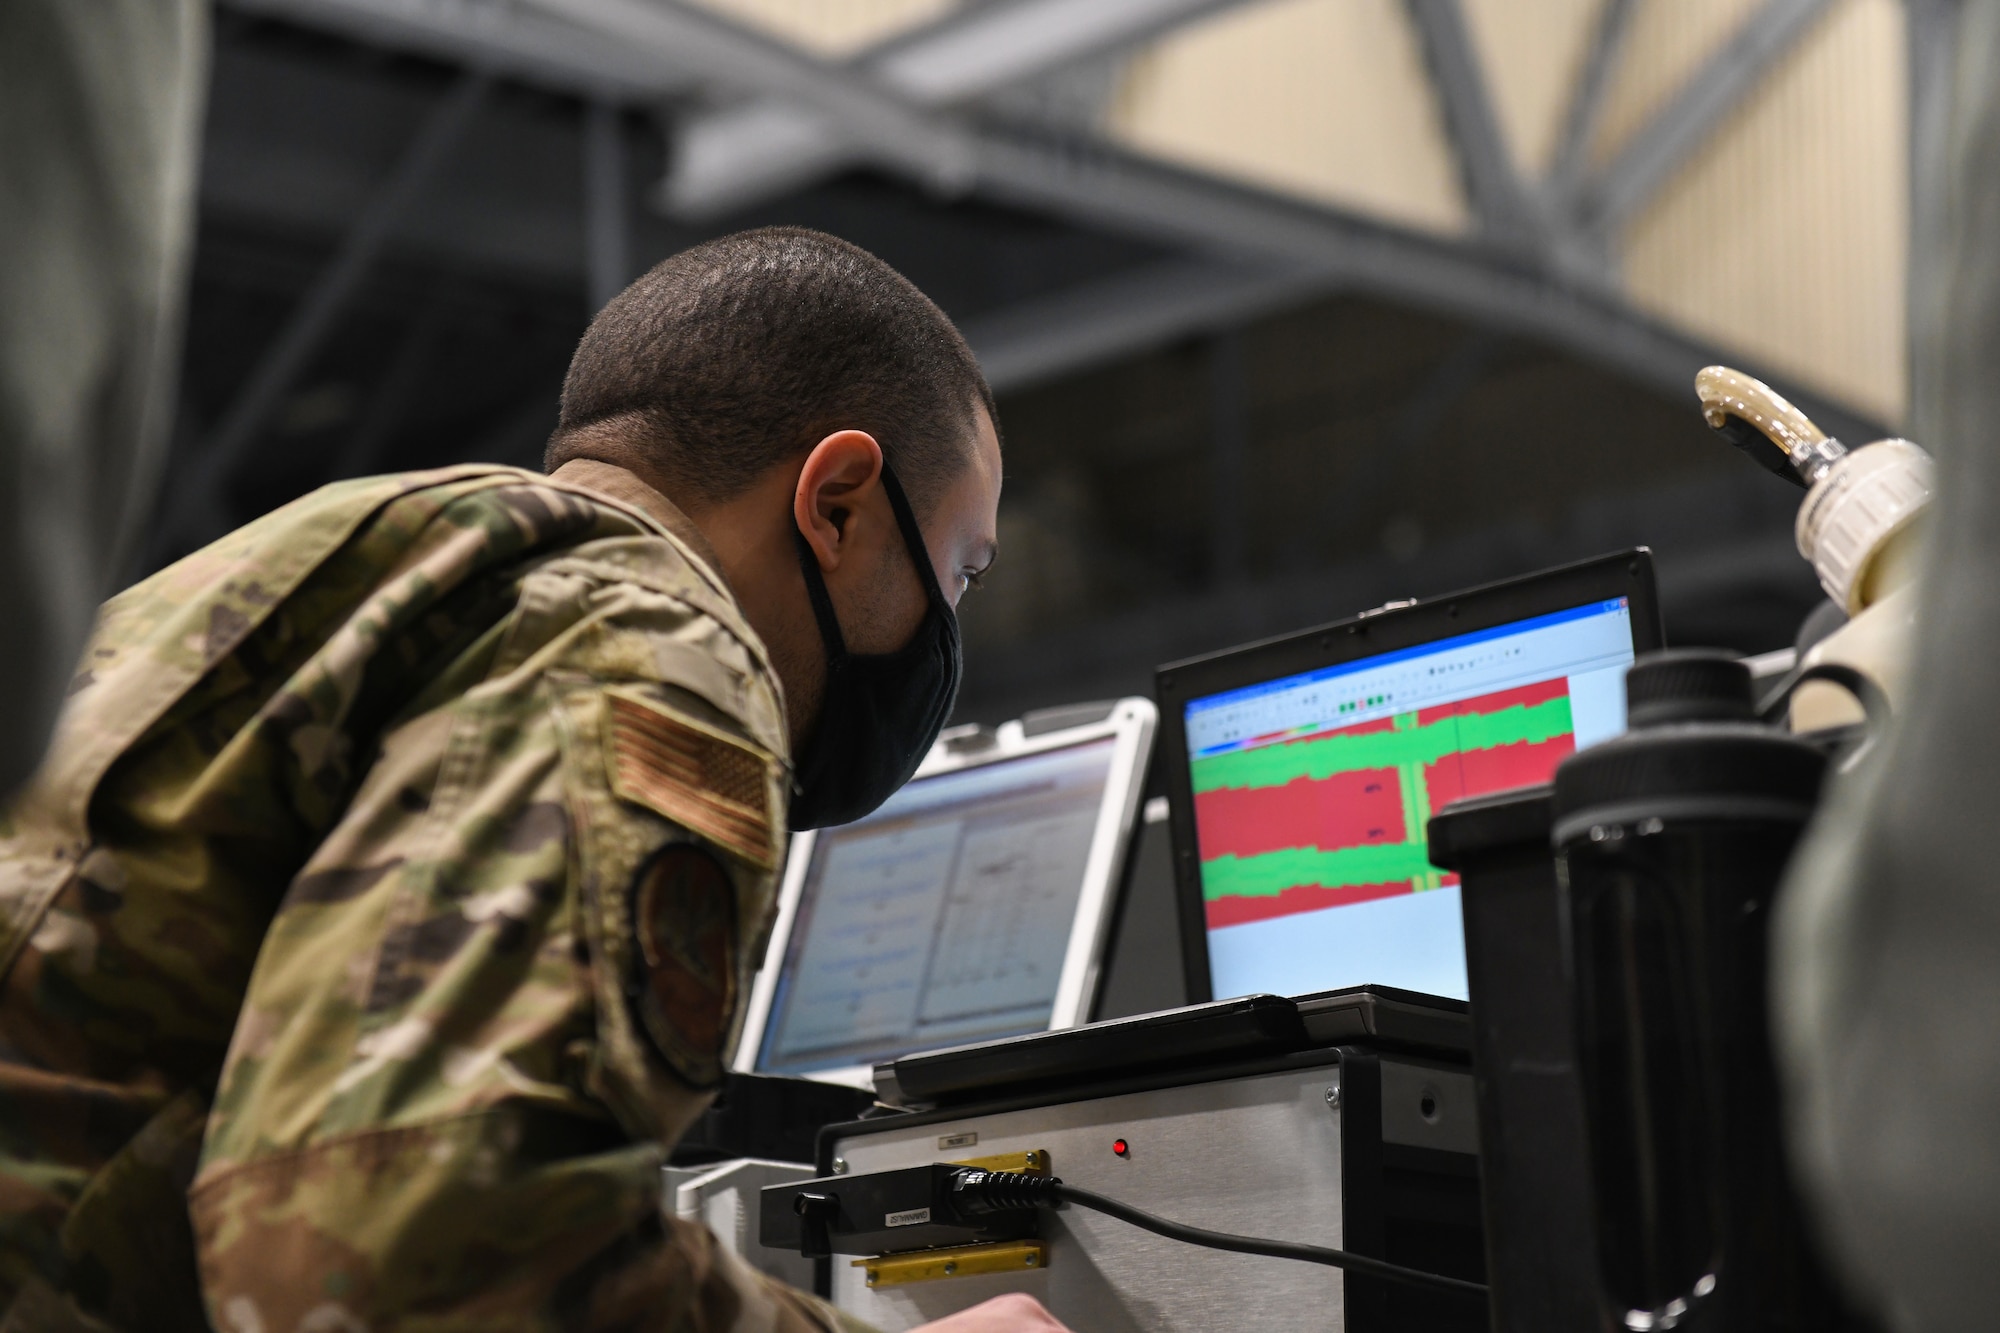 Senior Airman Harry Fraticelli, 319th Aircraft Maintenance Squadron nondestructive inspection craftsman, checks for cracks and defects on an RQ-4 Global Hawk using the image produced from a mobile automated scanner system on Grand Forks Air Force Base, N.D., March 25, 2021. Fraticelli has trained multiple Airmen in the 319 AMXS NDI shop to be certified to lead a MAUS inspection on the RQ-4 Global Hawk. (U.S. Air Force photo by Airman 1st Class Ashley Richards)